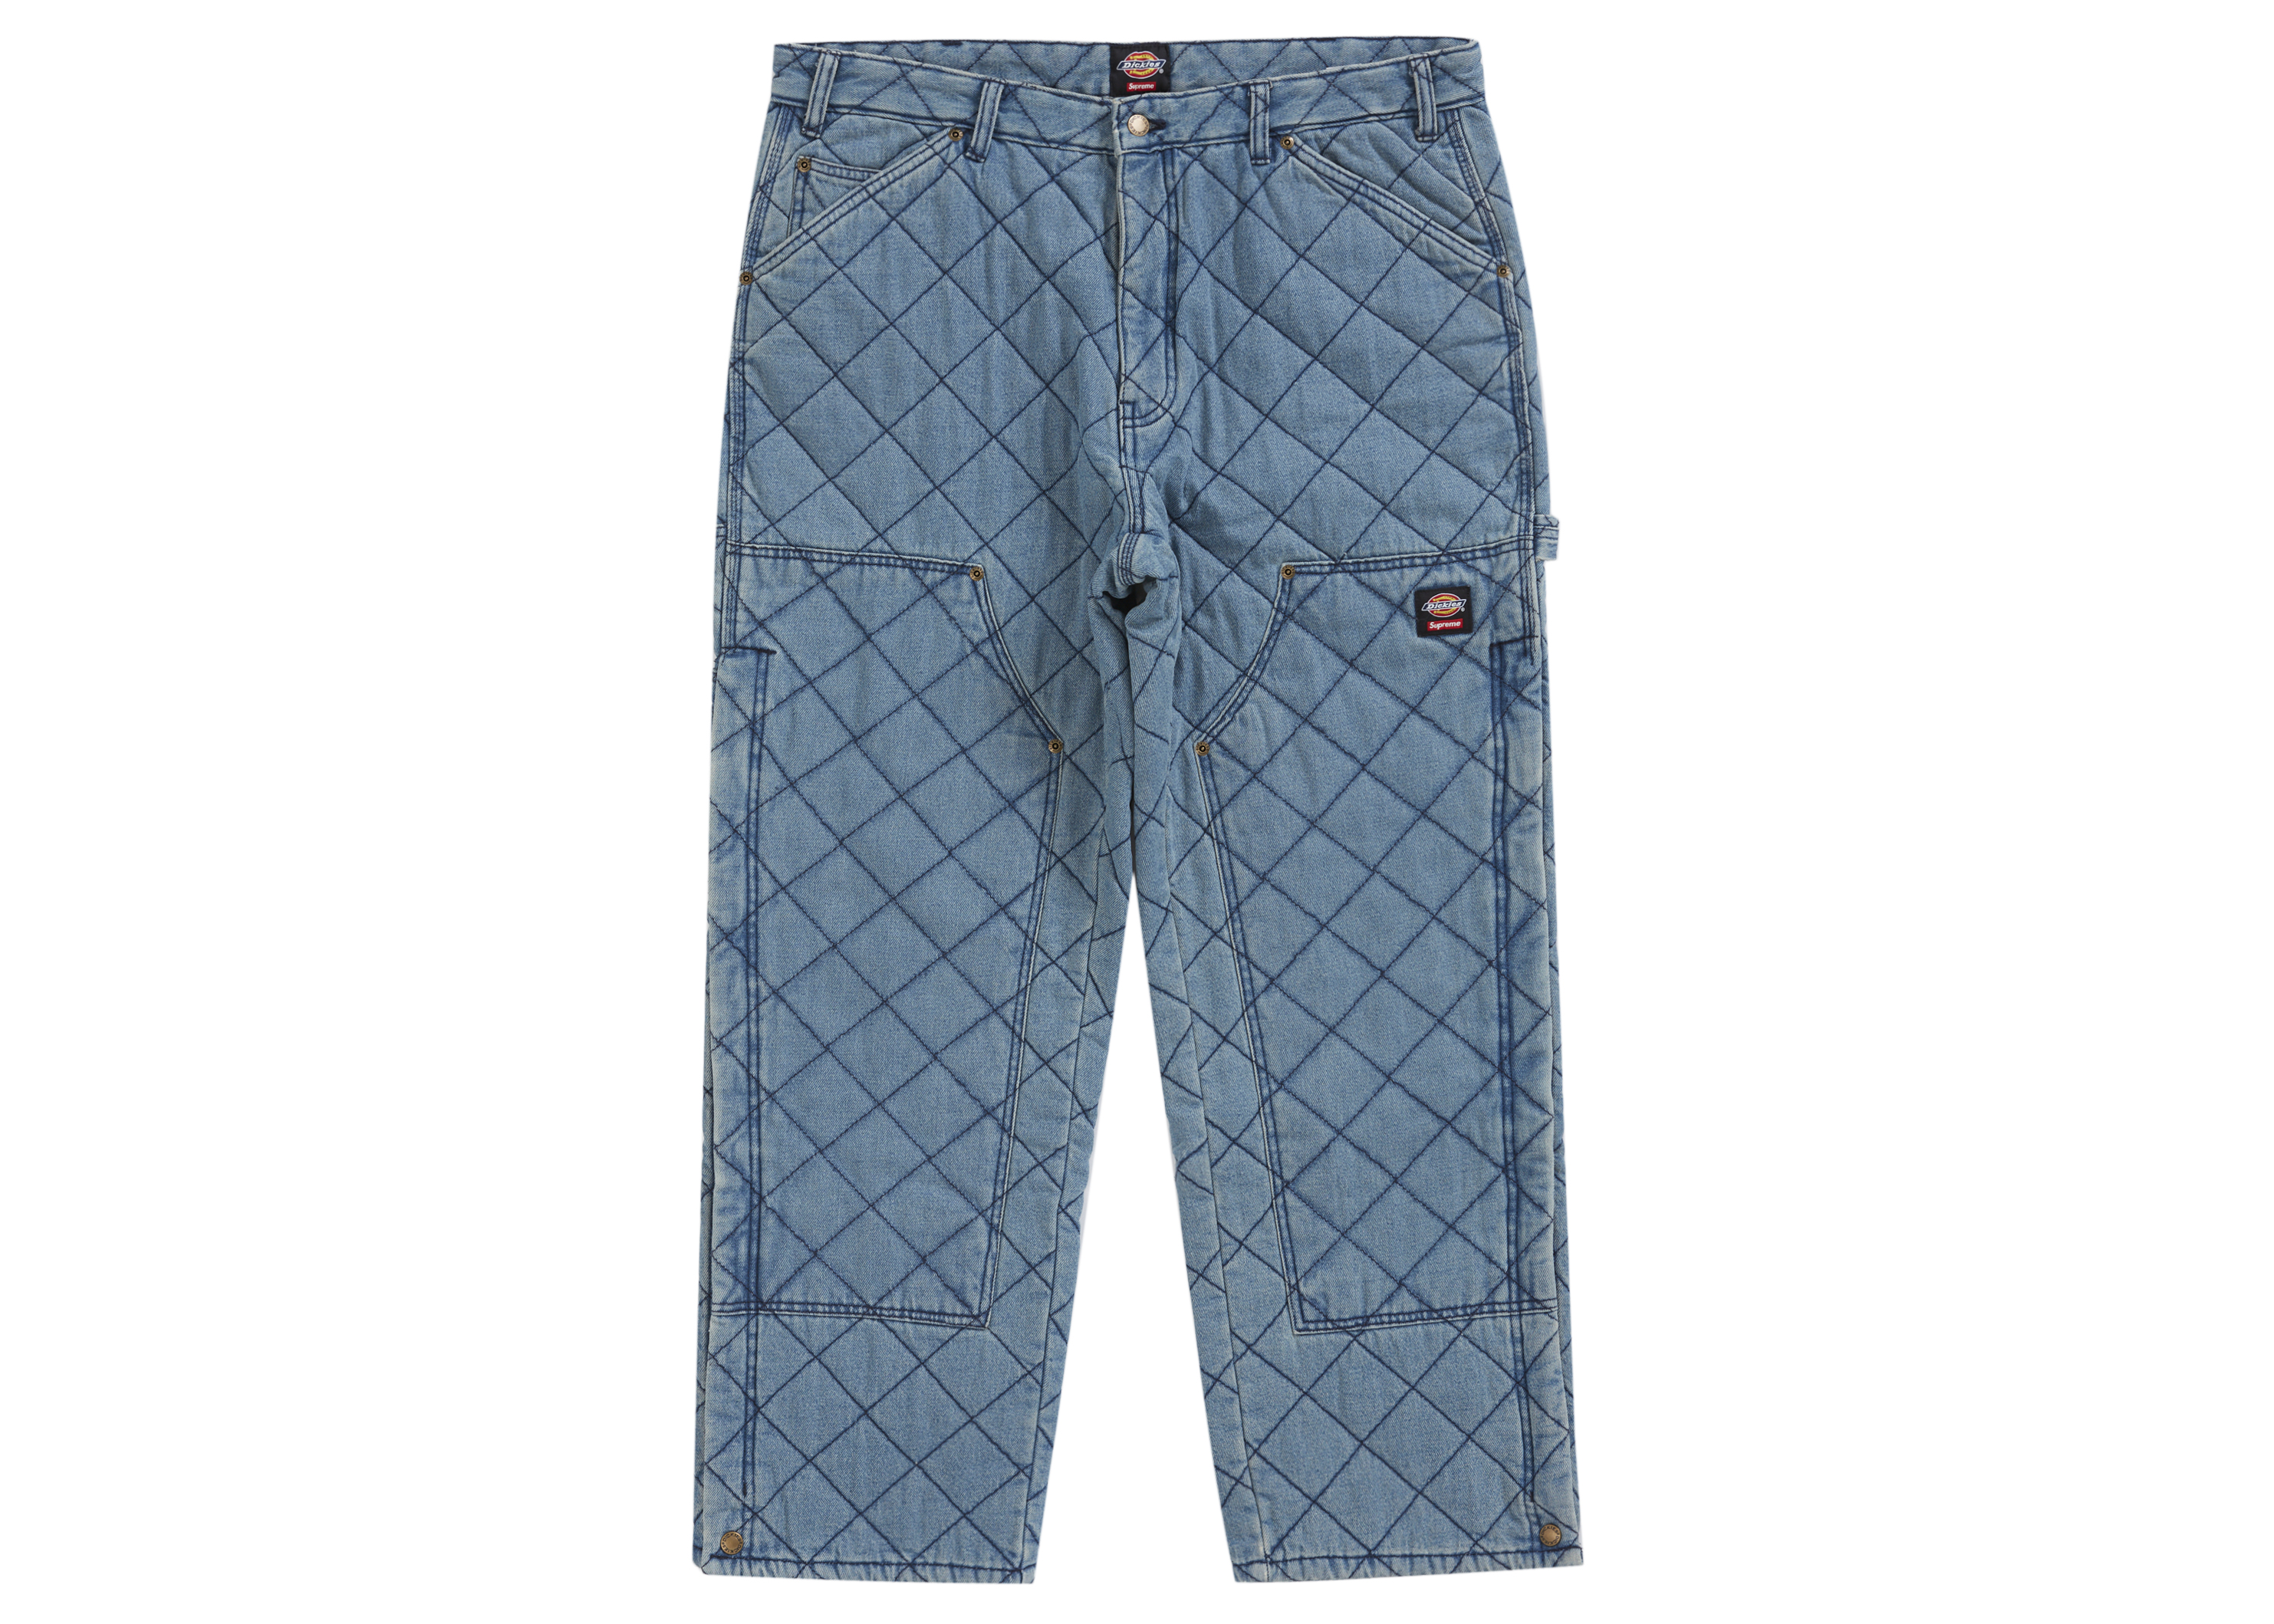 Supreme Dickies Quilted Double Knee Painter Pant Denim - FW21 - GB